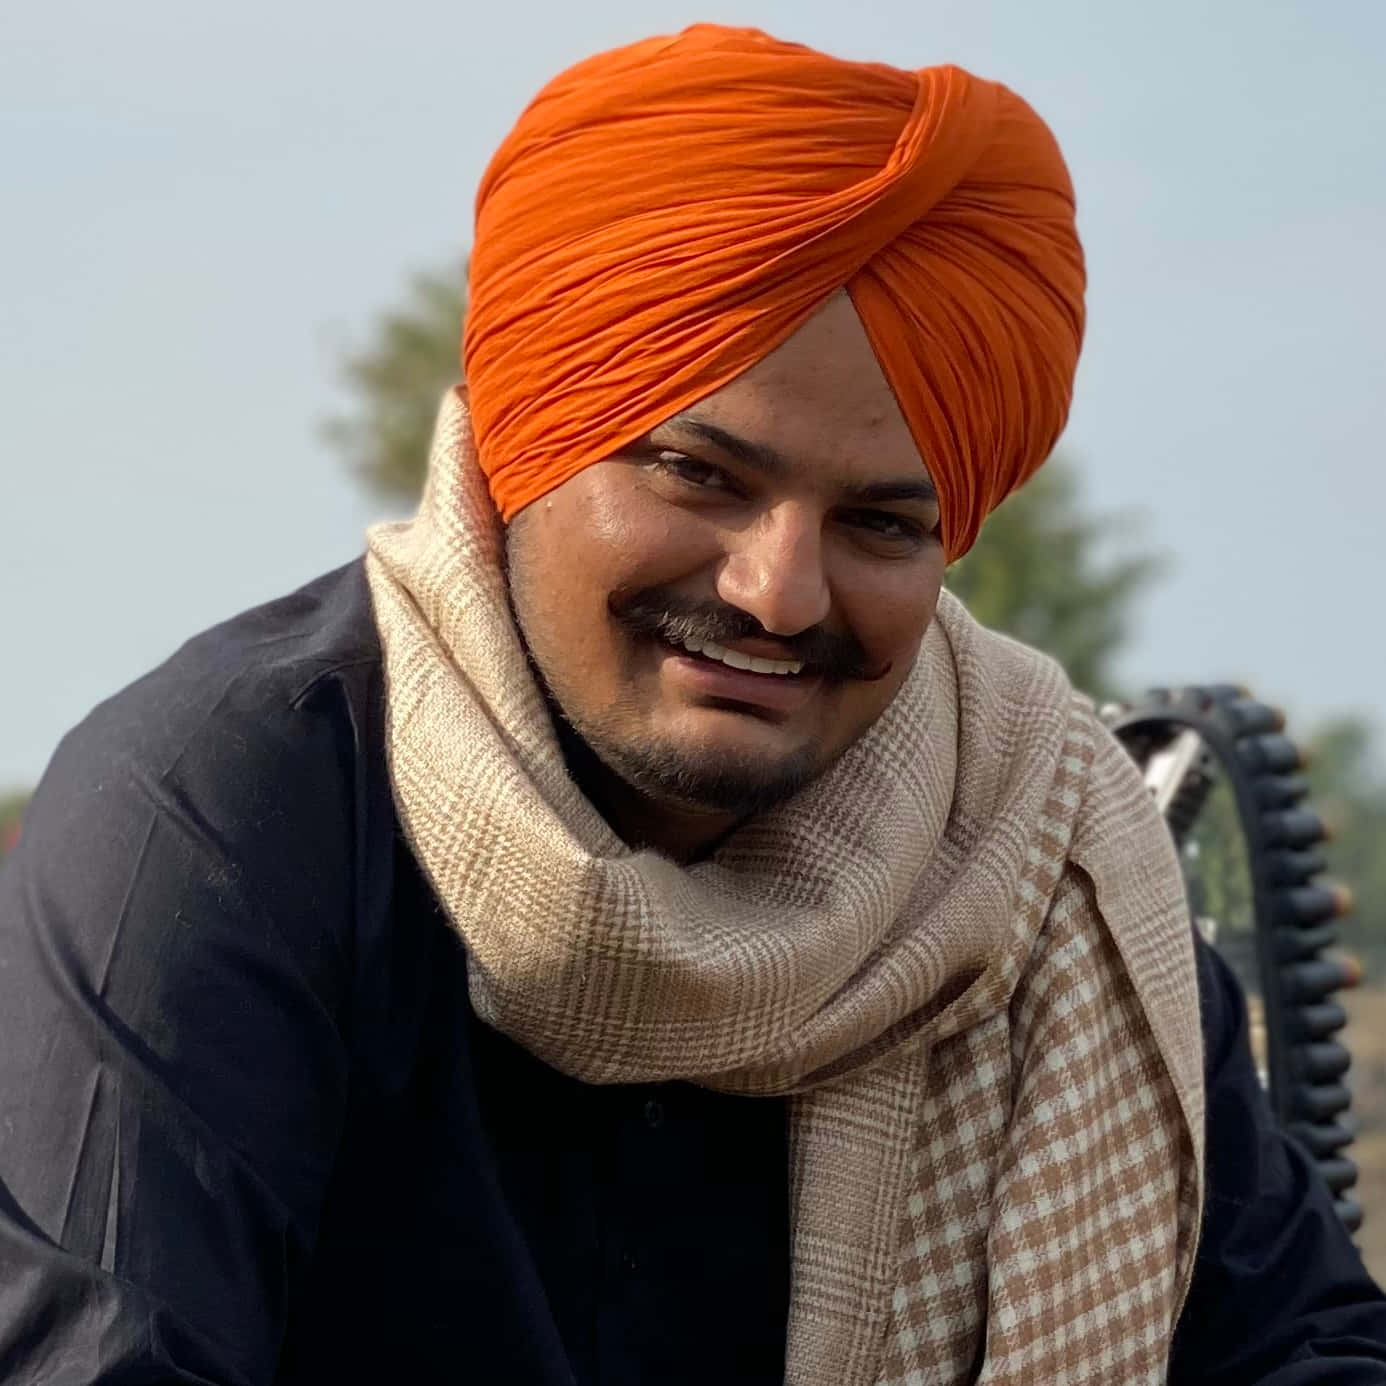 A Man In A Turban Smiling